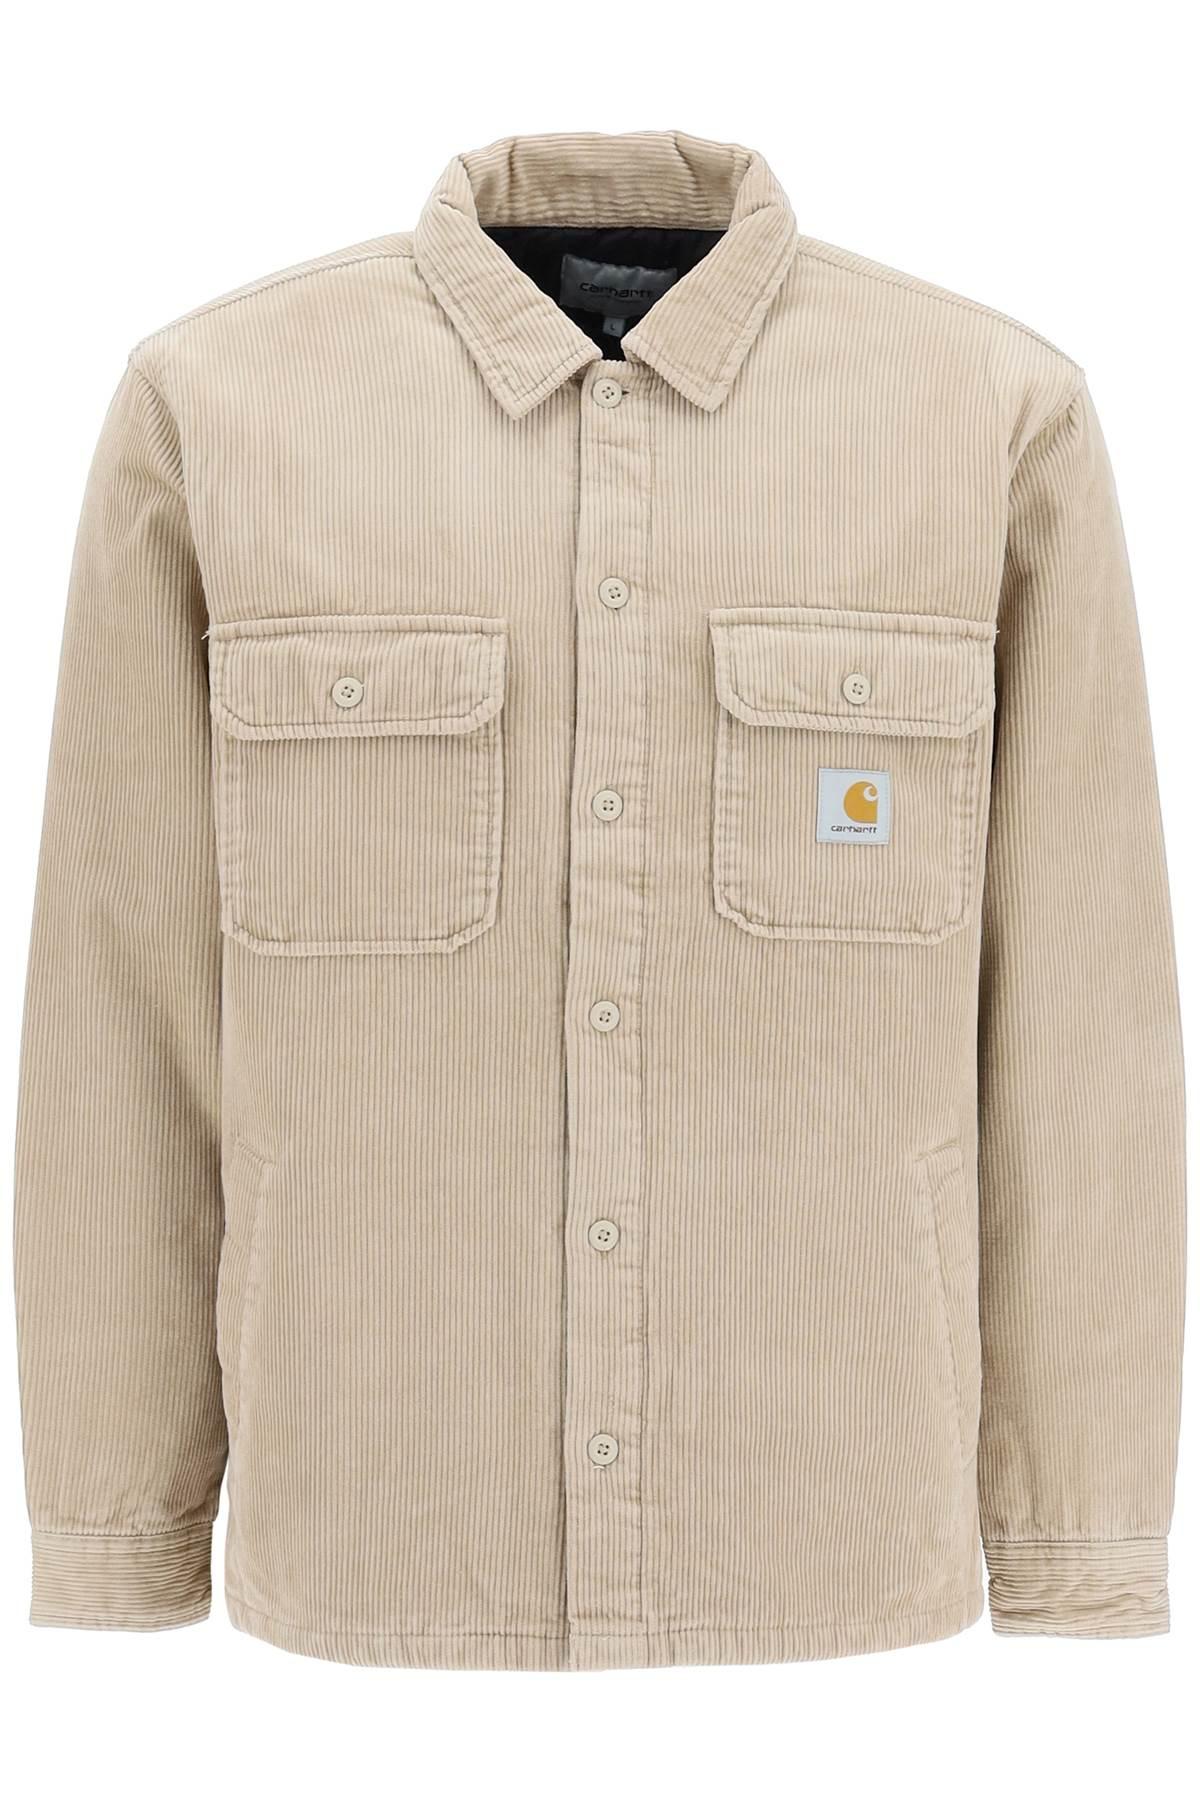 Carhartt WIP Whitsome Corduroy Jacket in Natural for Men | Lyst UK